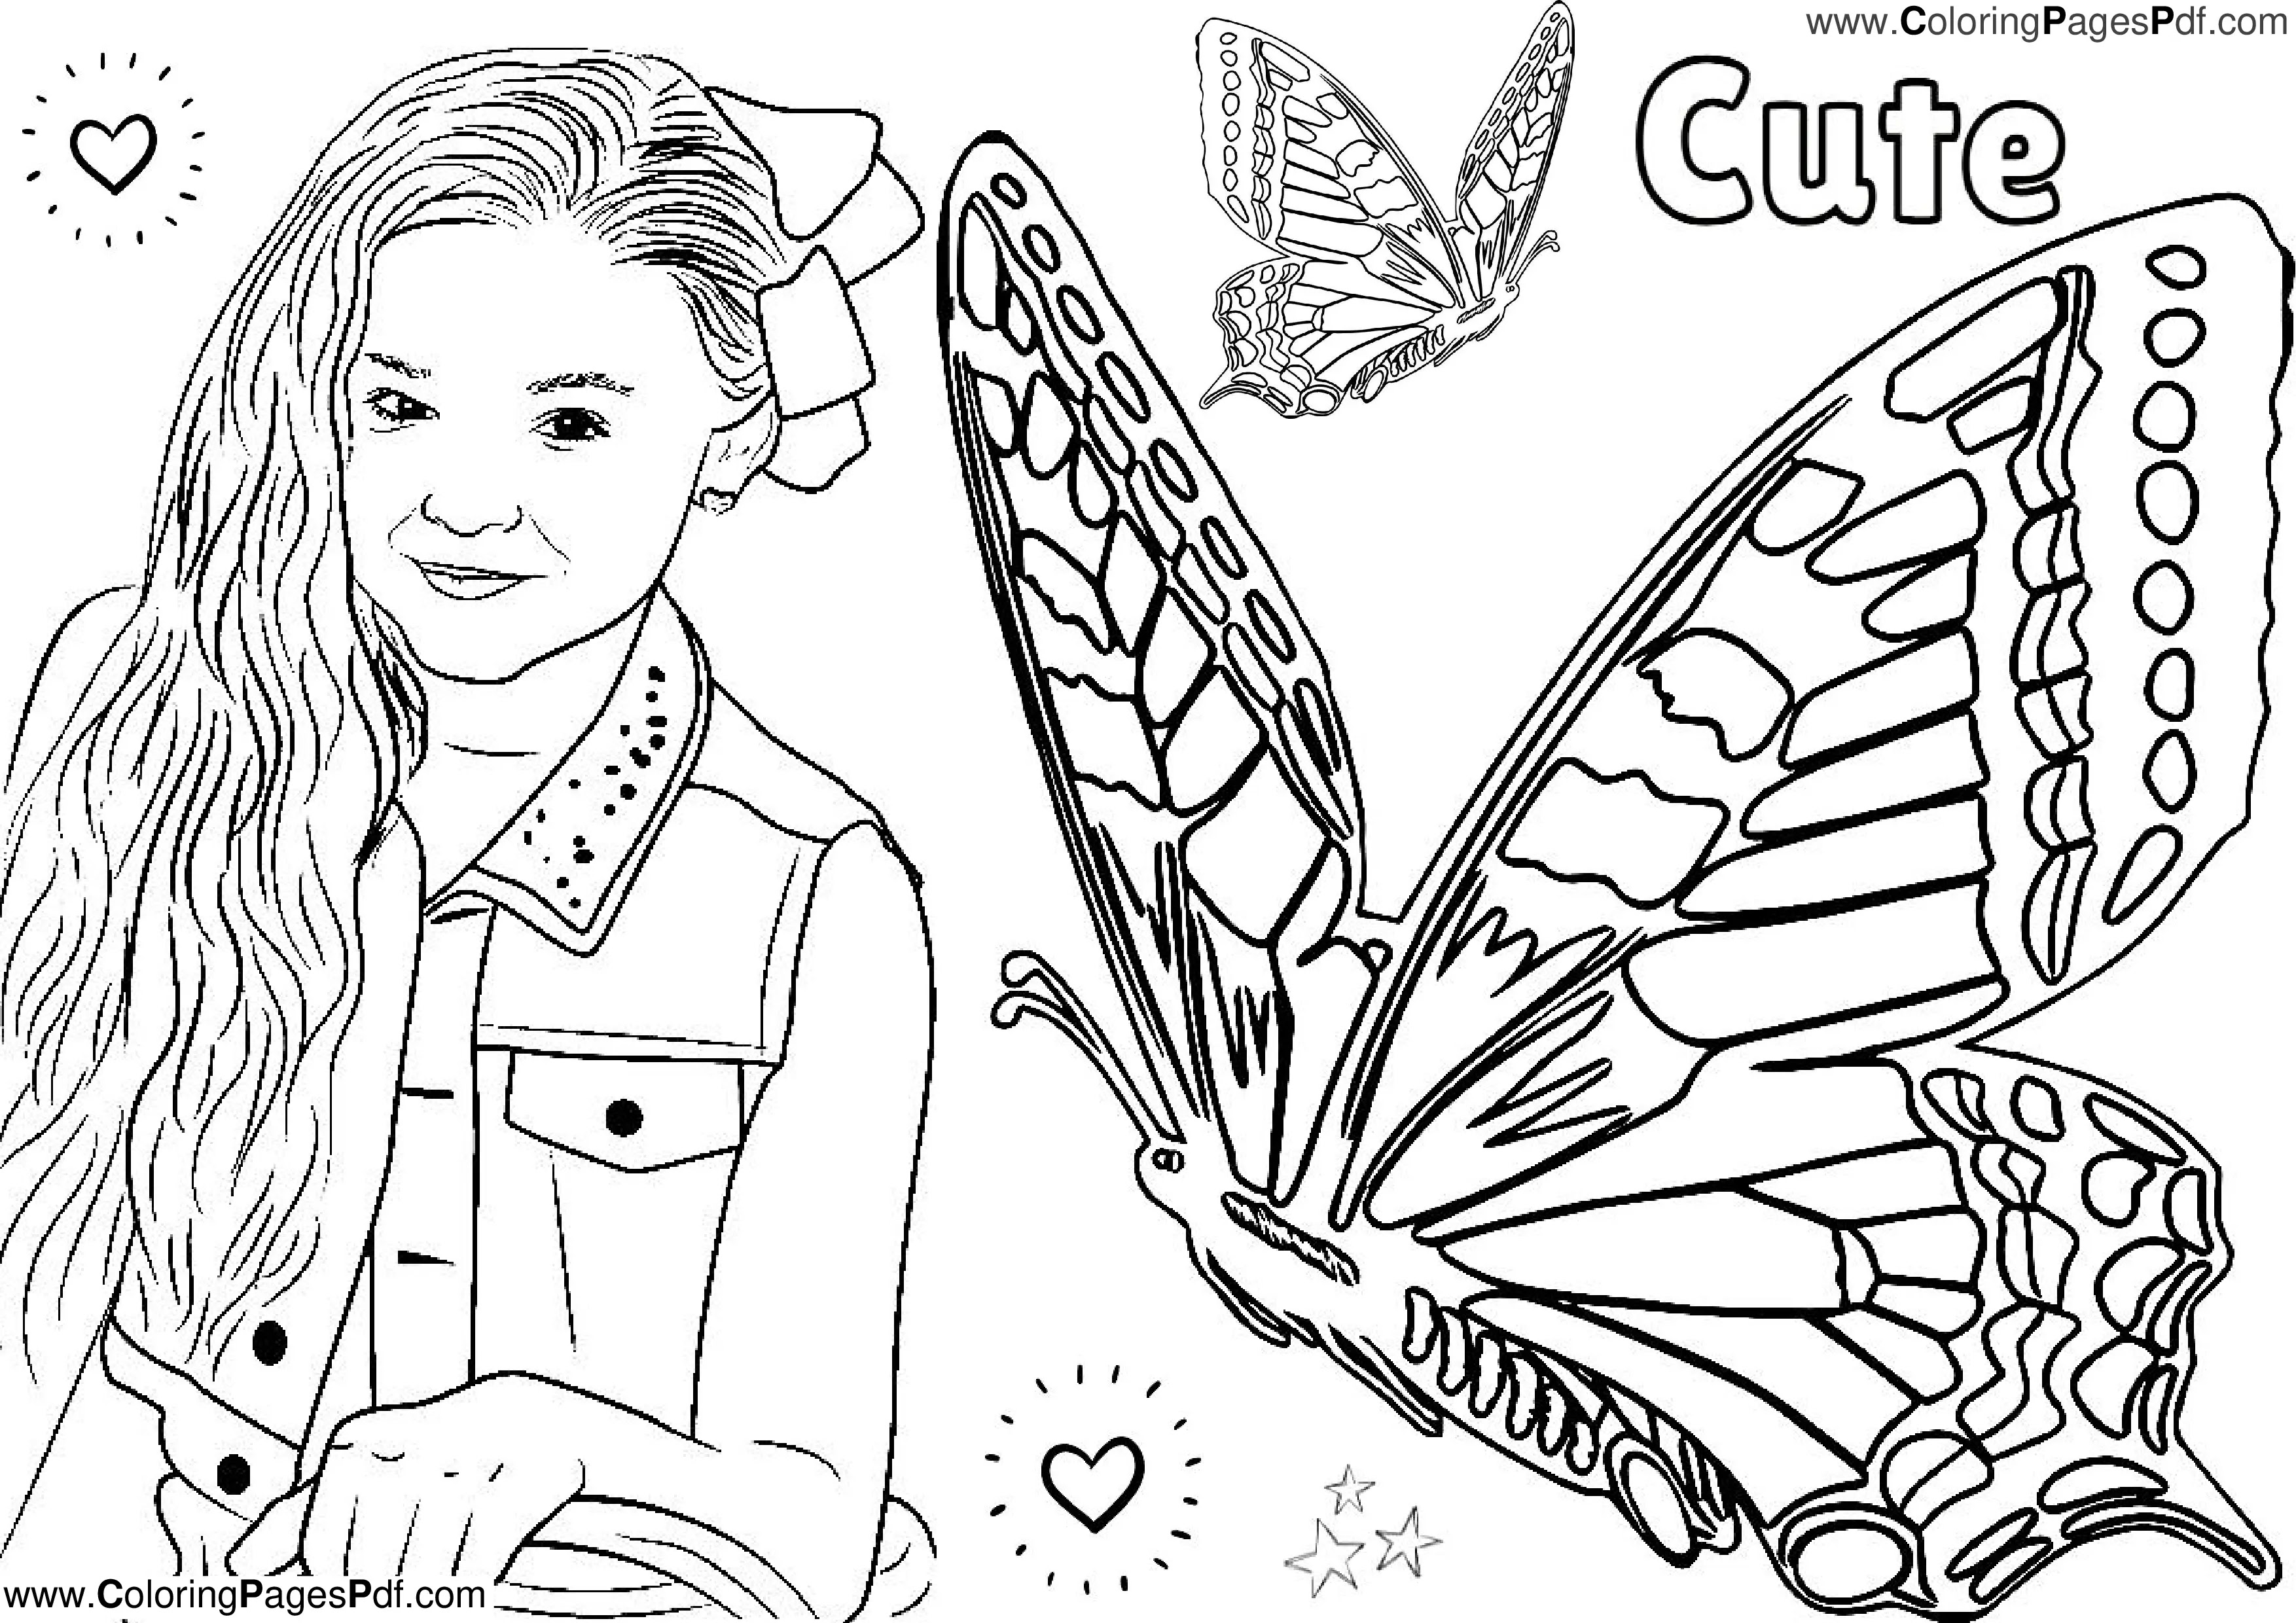 Jojo siwa coloring pages for girls